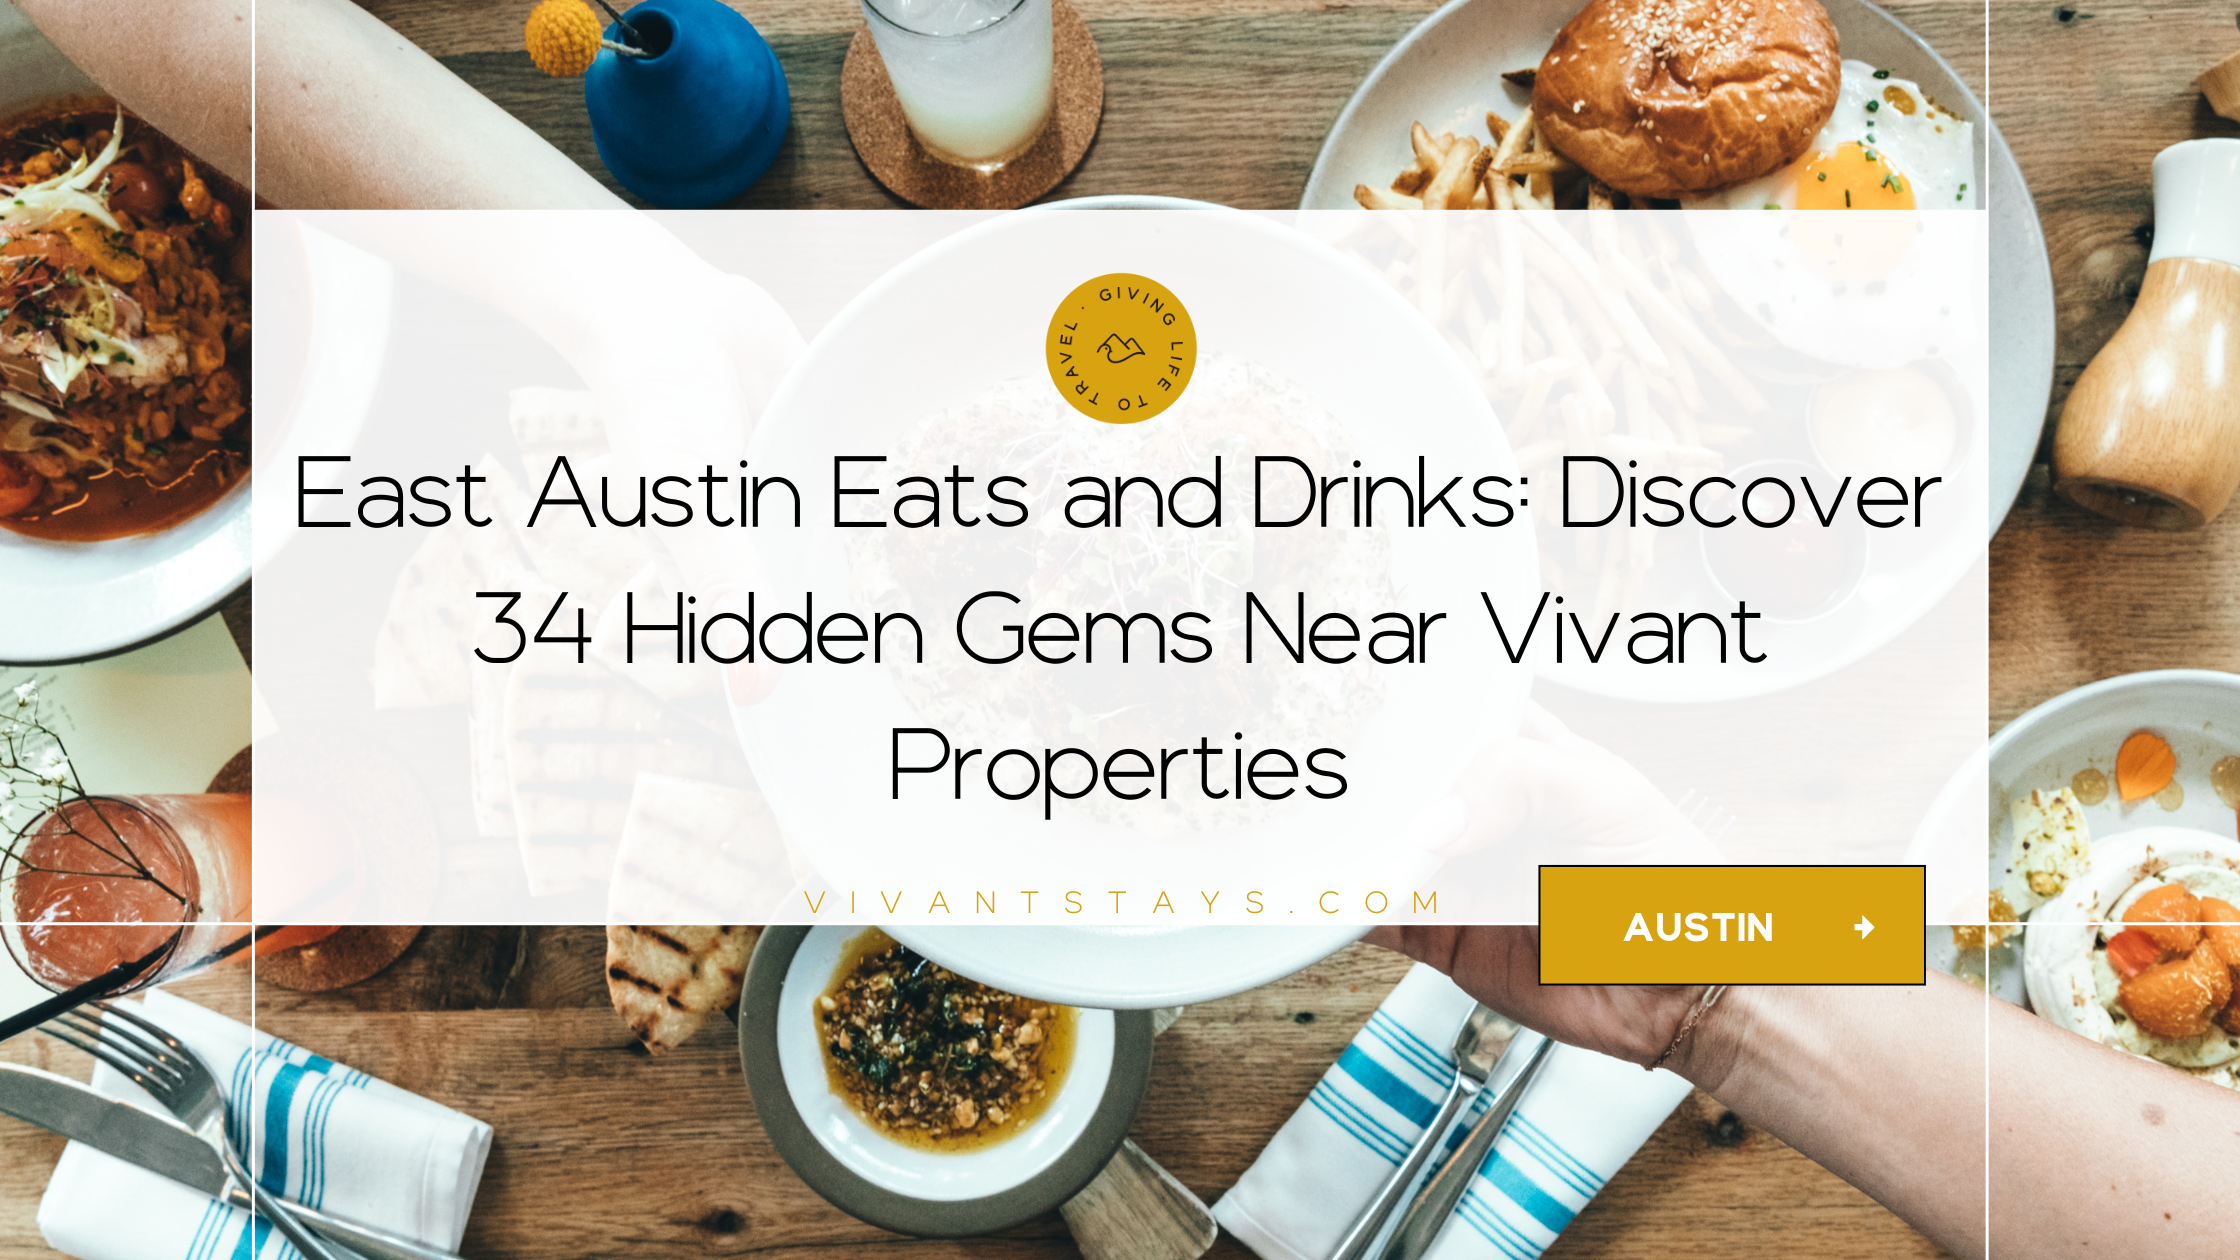 Image of food and drinks on a table with the blog post title “East Austin Eats and Drinks: Discover 34 Hidden Gems Near Vivant Properties”